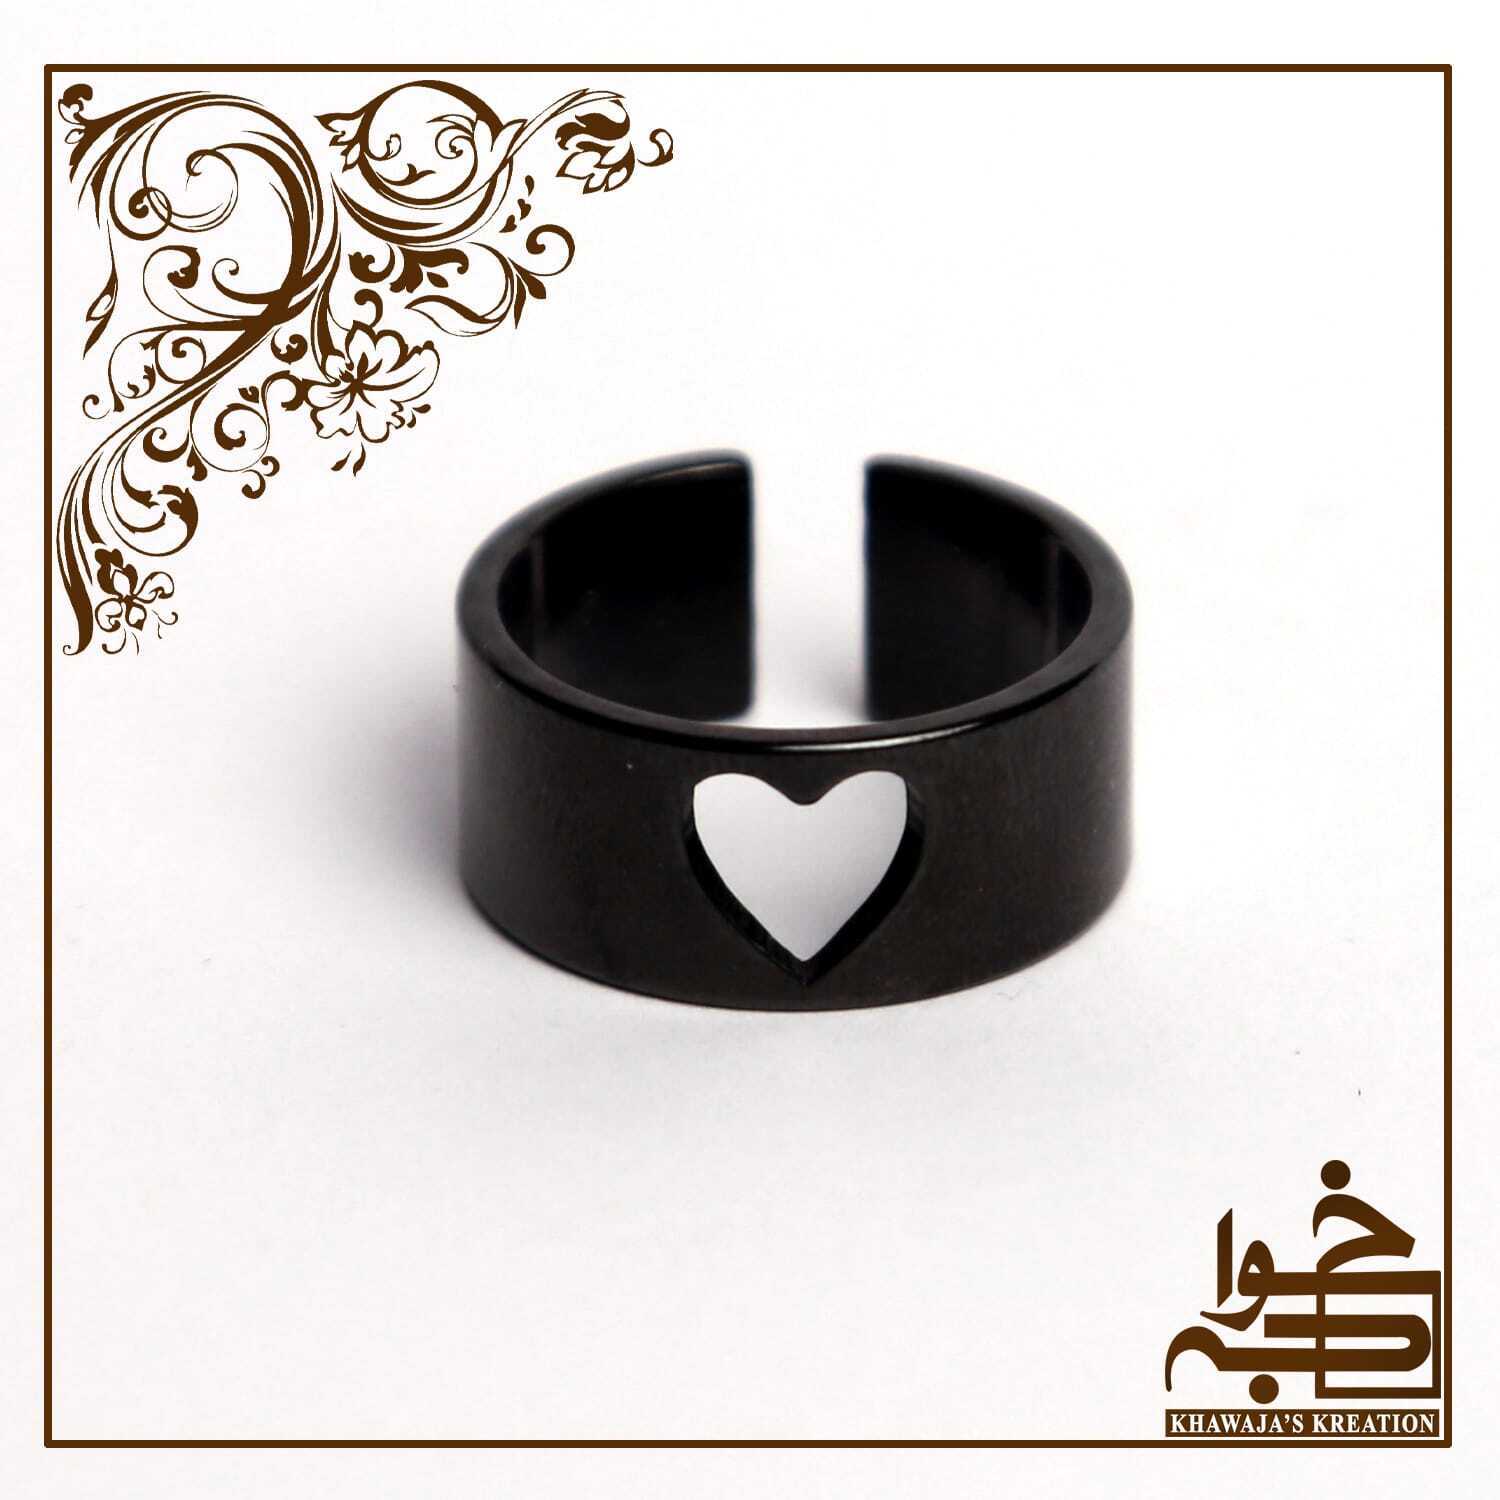 1pc Stainless Steel Rings 3D Women Body Shape Gothic Punk Motorcycl Jewelry  Gifts Free Shipping